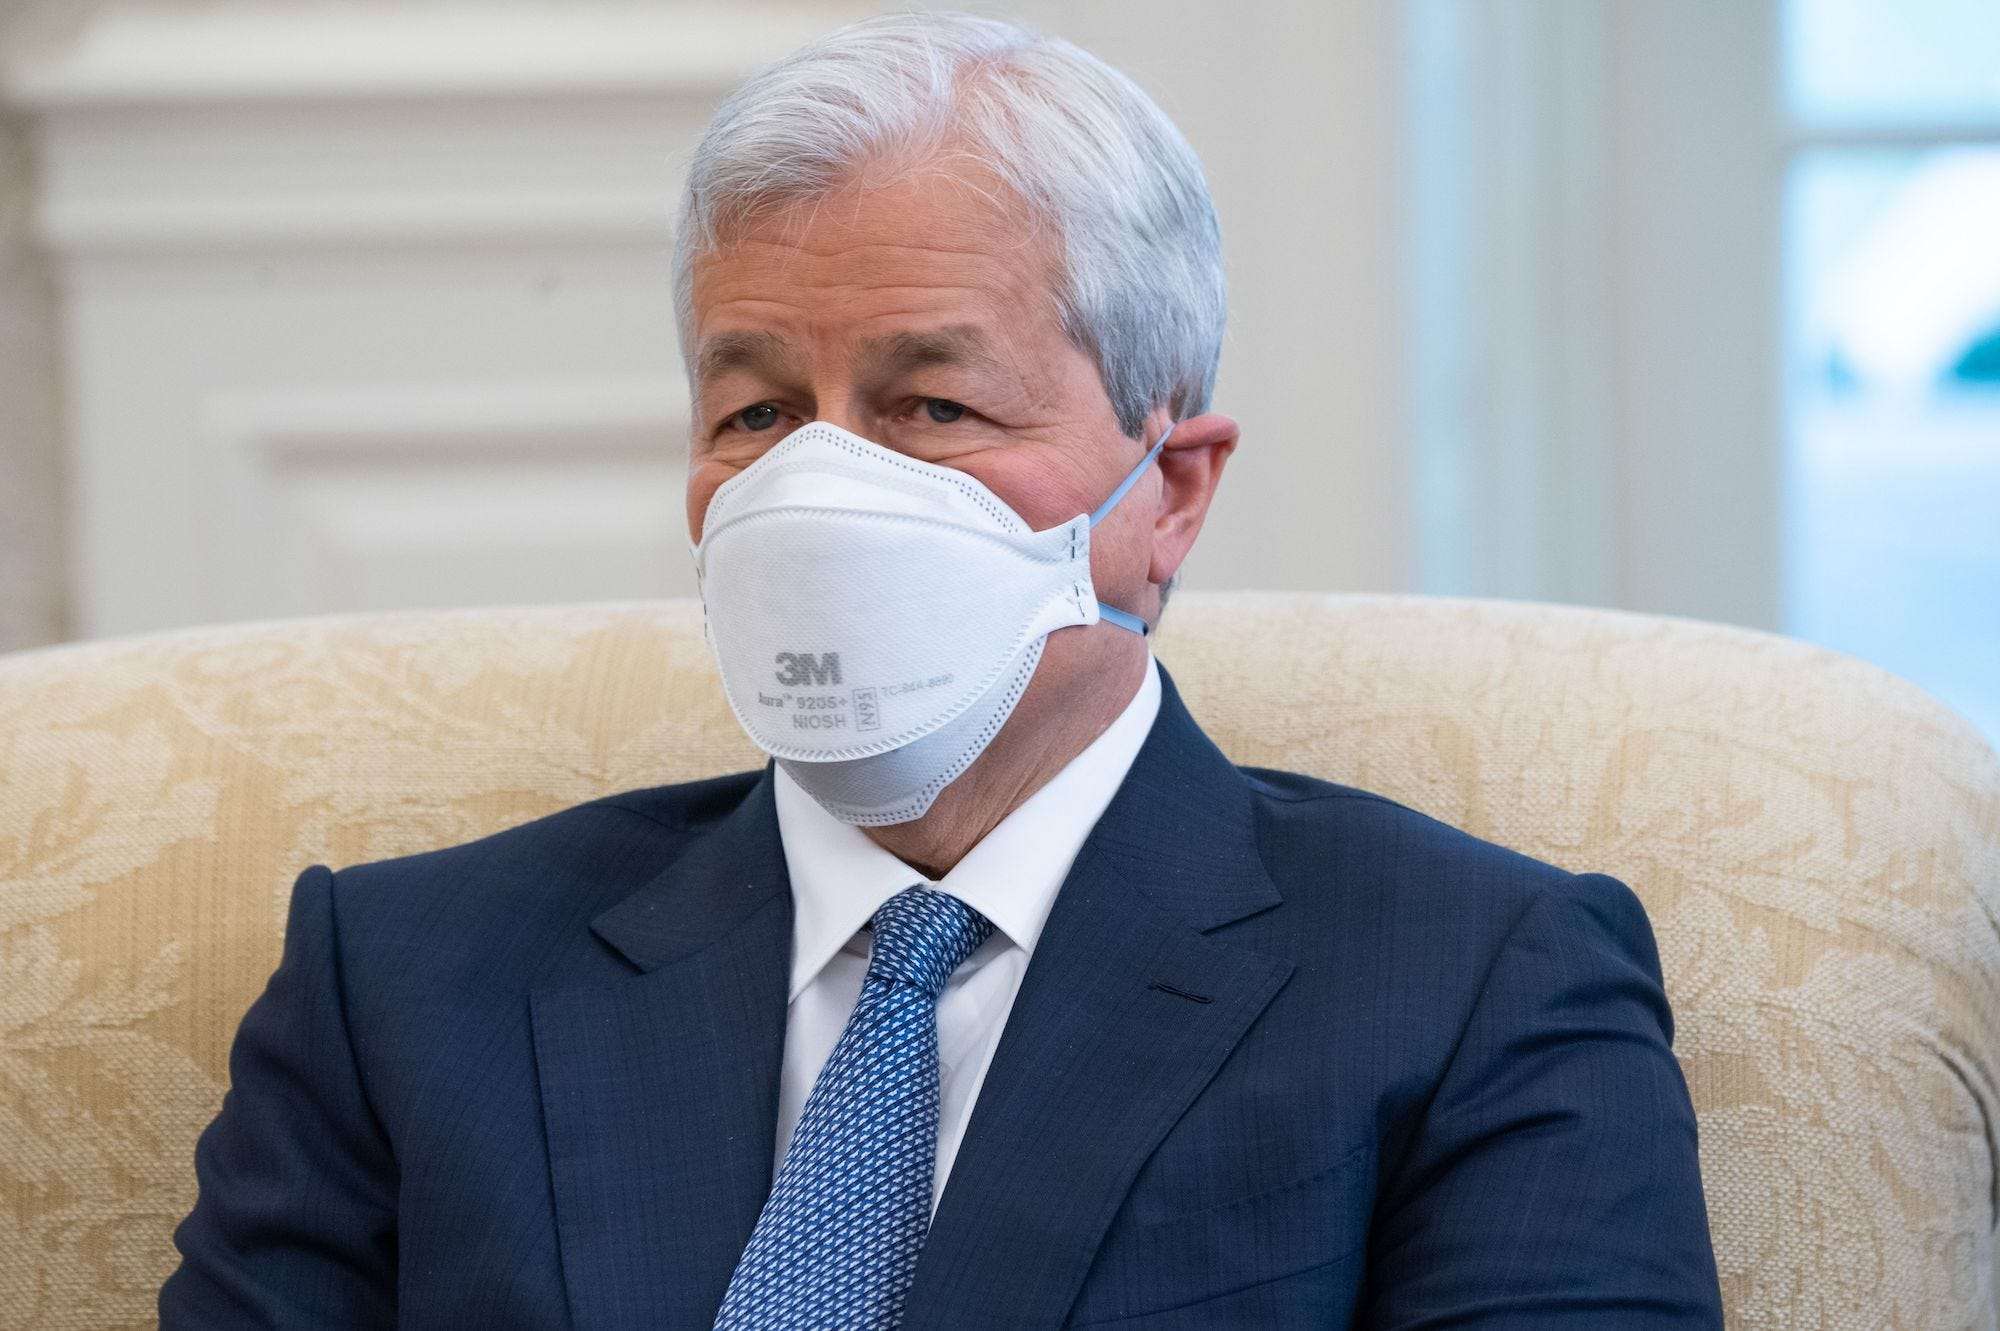 CEO Jamie Dimon says the bank will only need office capacity